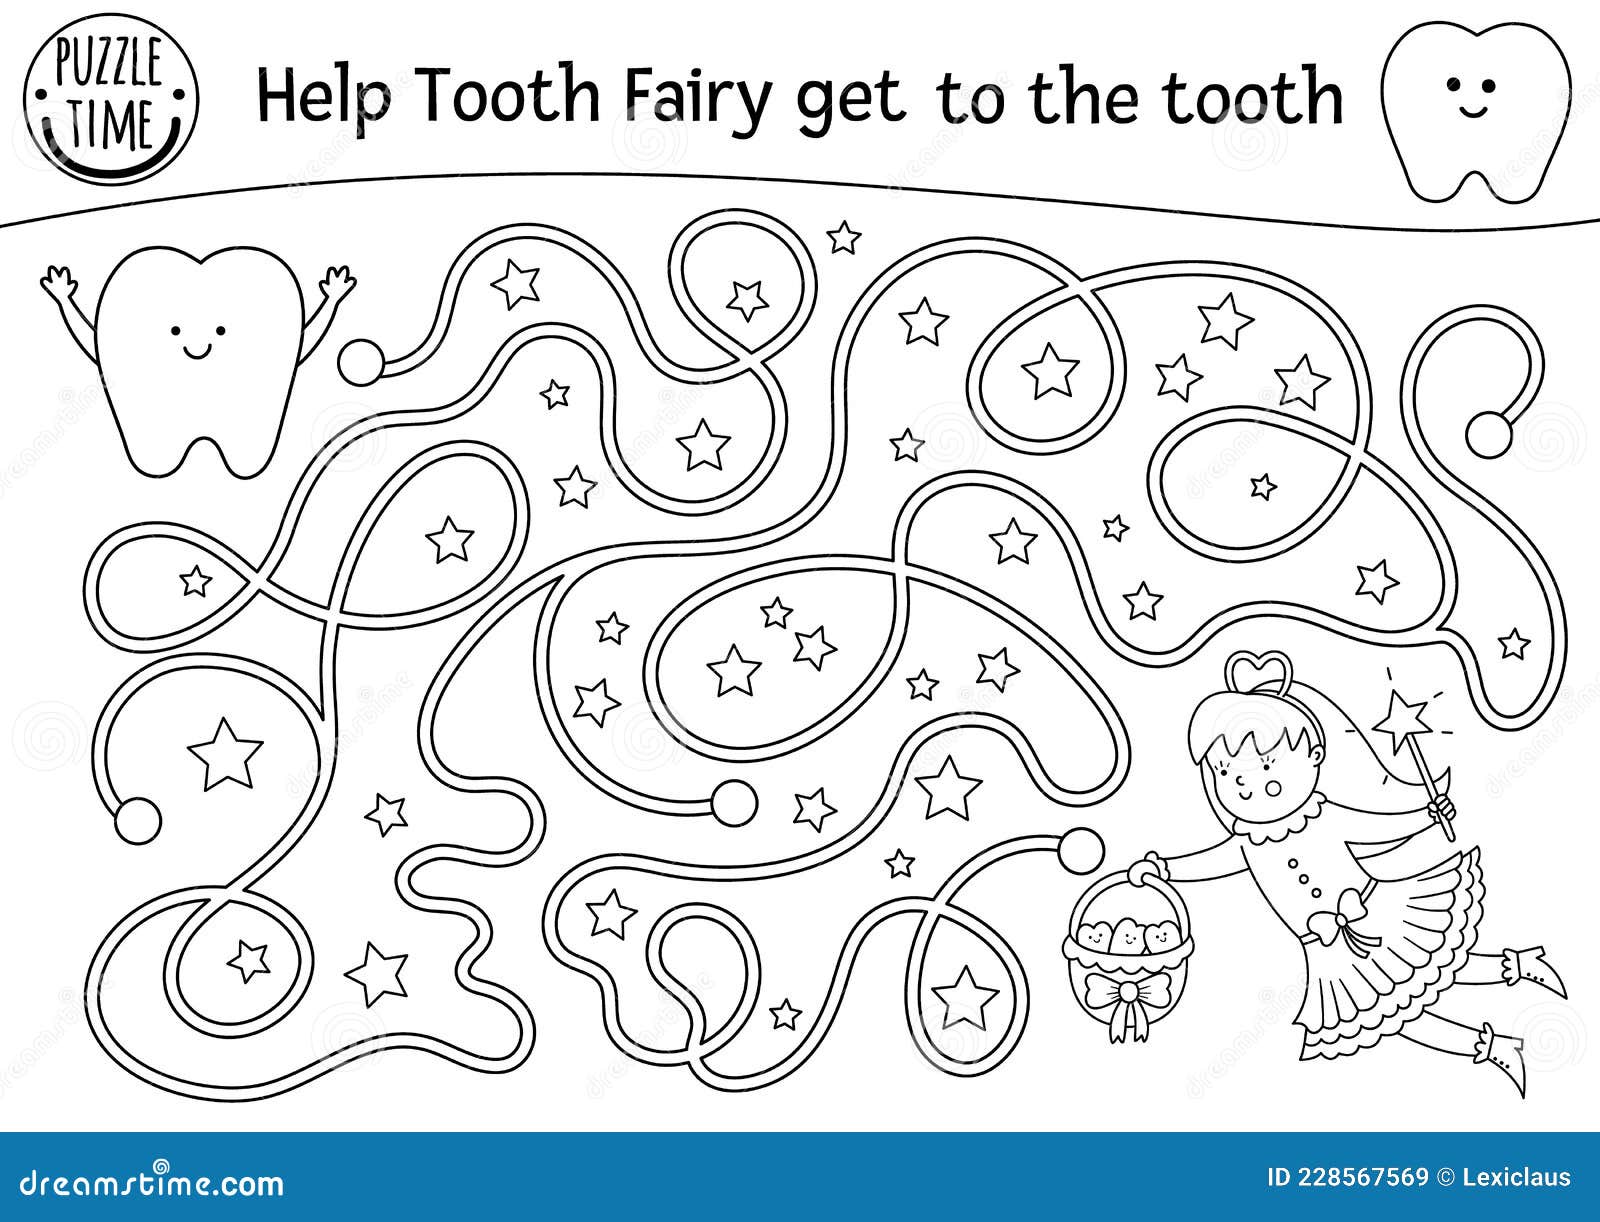 Black and white dental care maze for children preschool line dentist clinic activity or coloring page stock vector